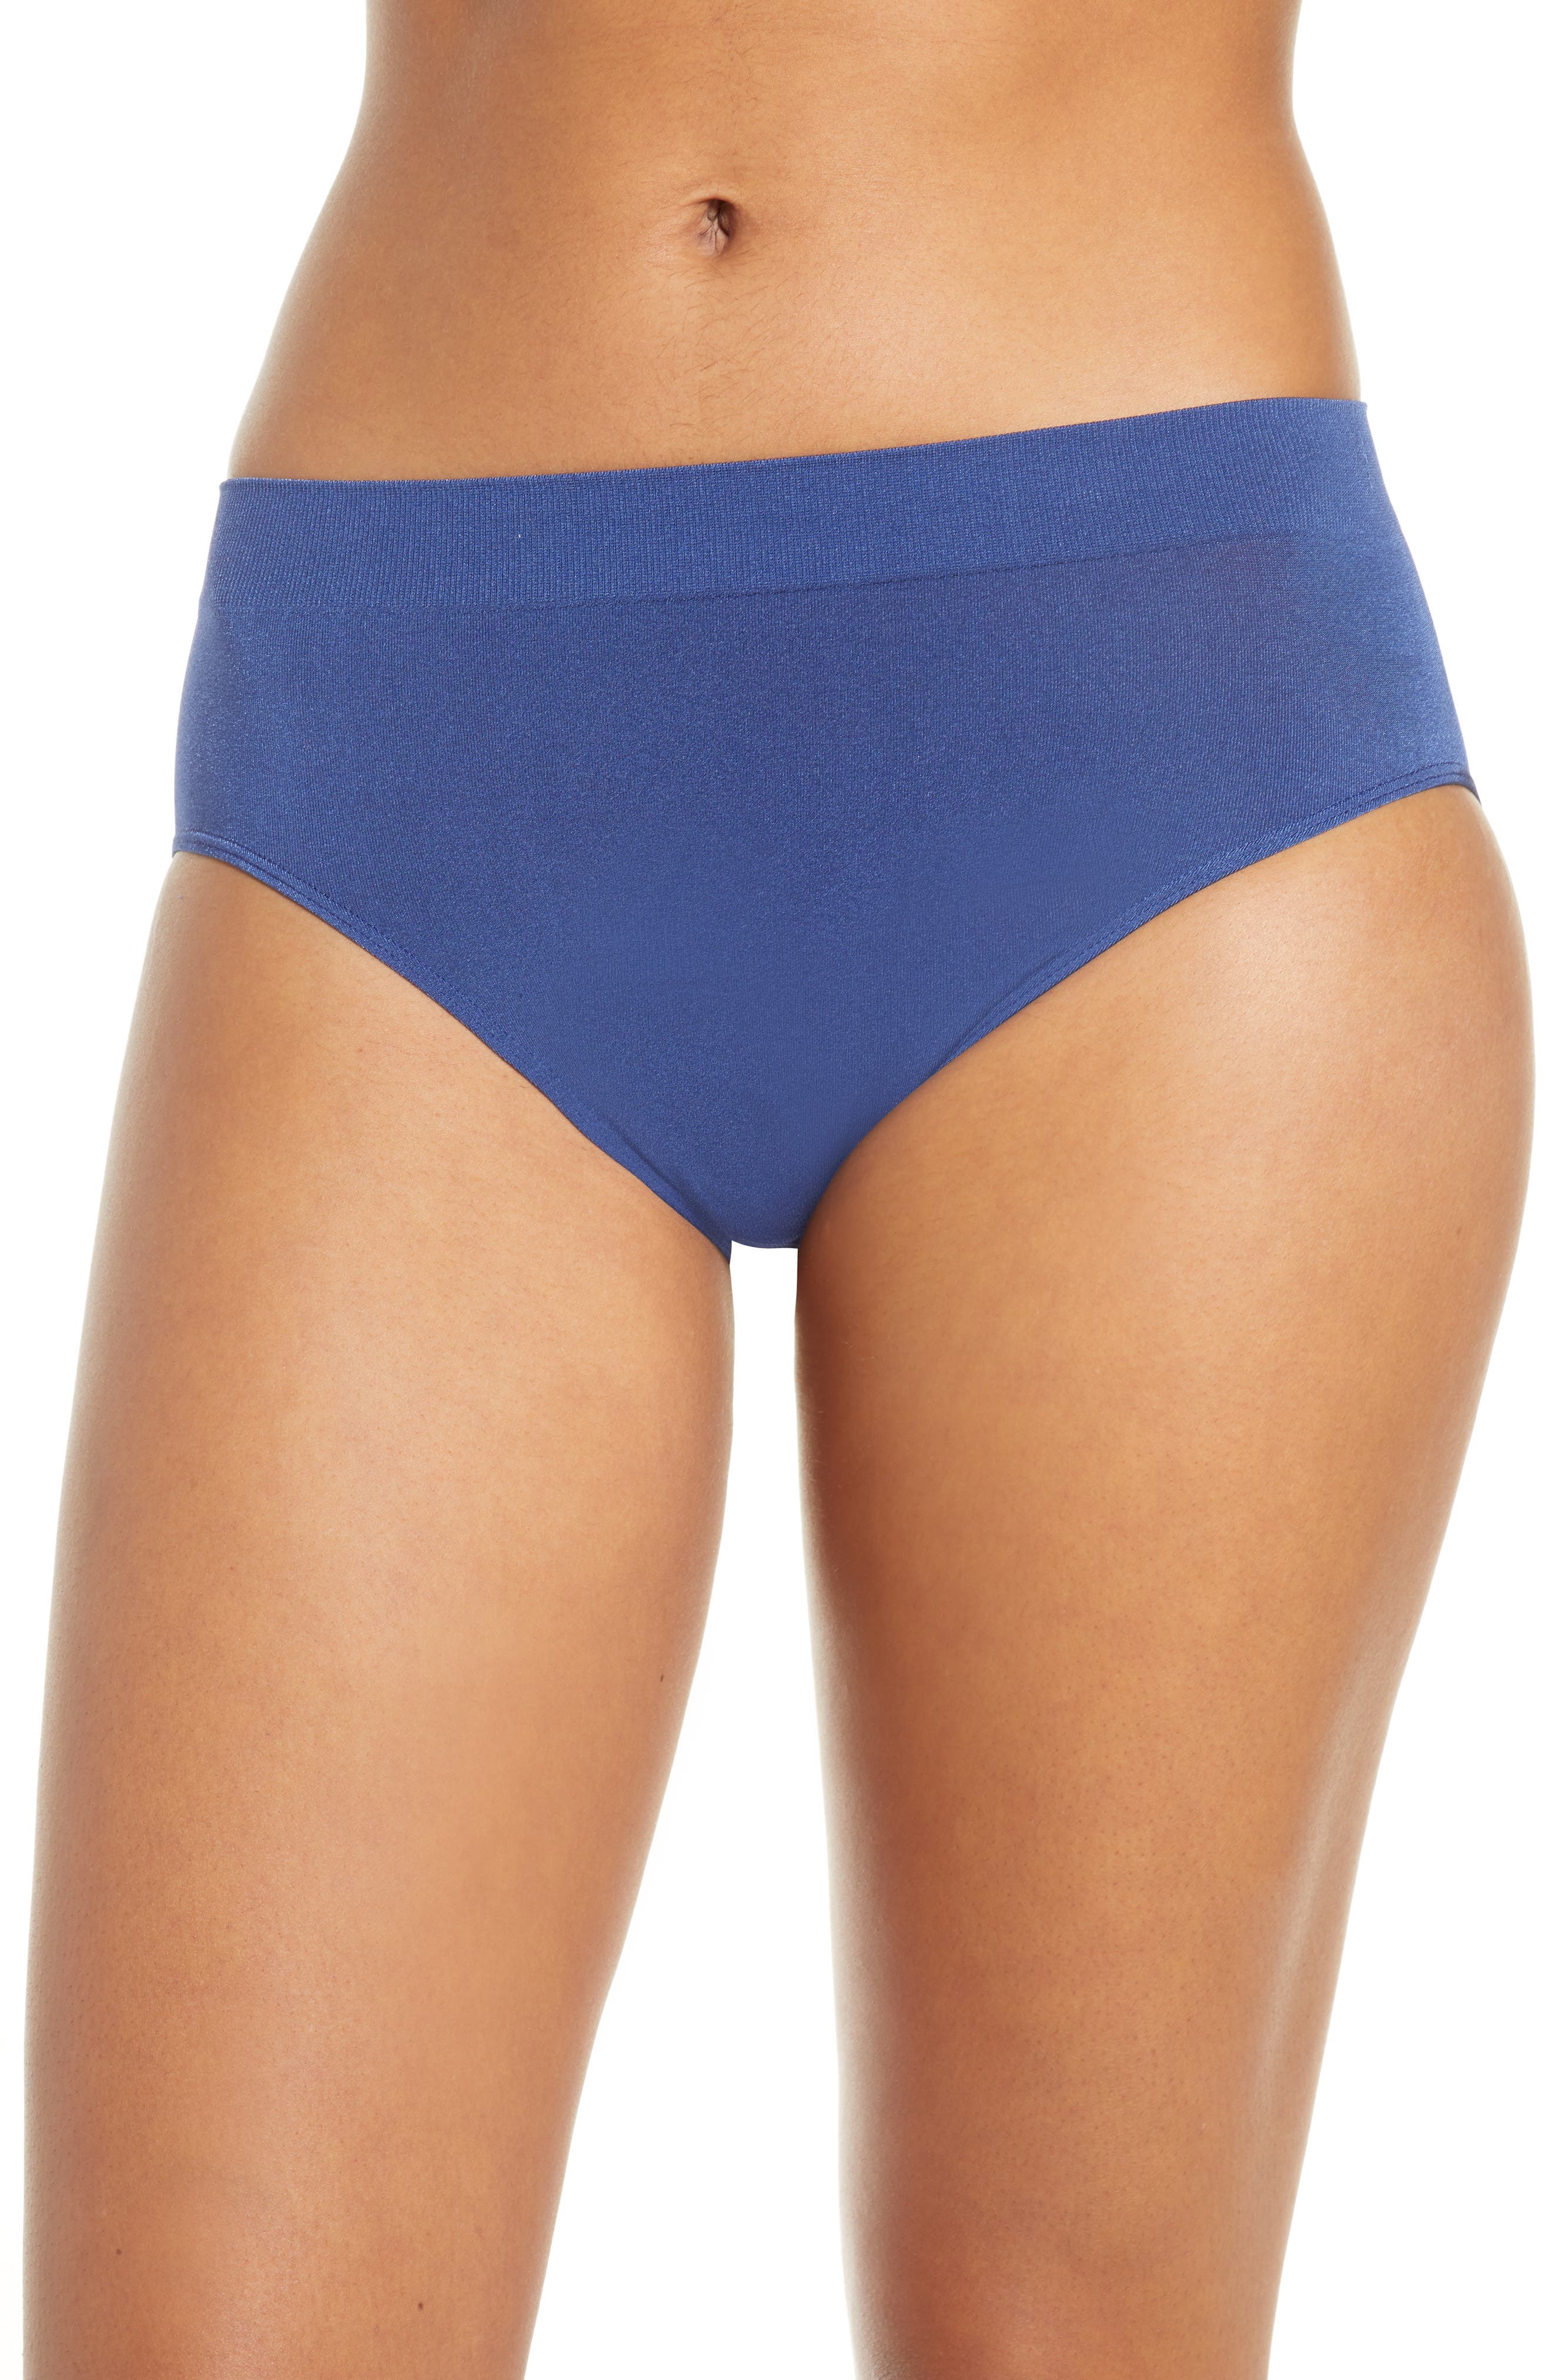 UPC 719544871457 product image for Women's Wacoal B Smooth High Cut Briefs, Size Large - Blue | upcitemdb.com